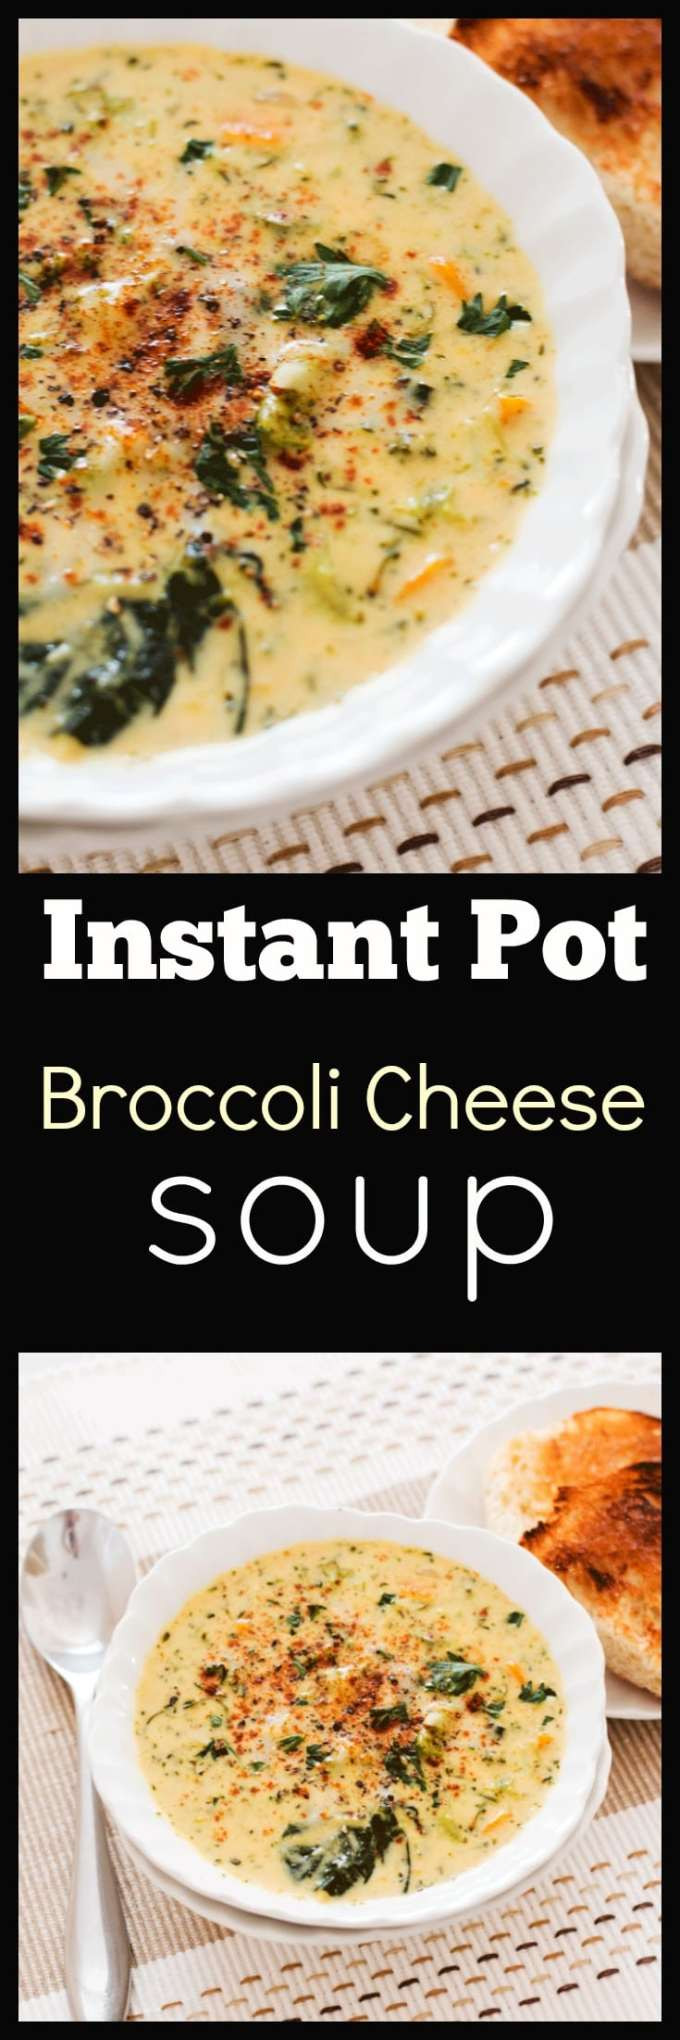 Instant Pot Broccoli Soup
 Instant Pot Broccoli Cheese Soup in Under 20 Minutes